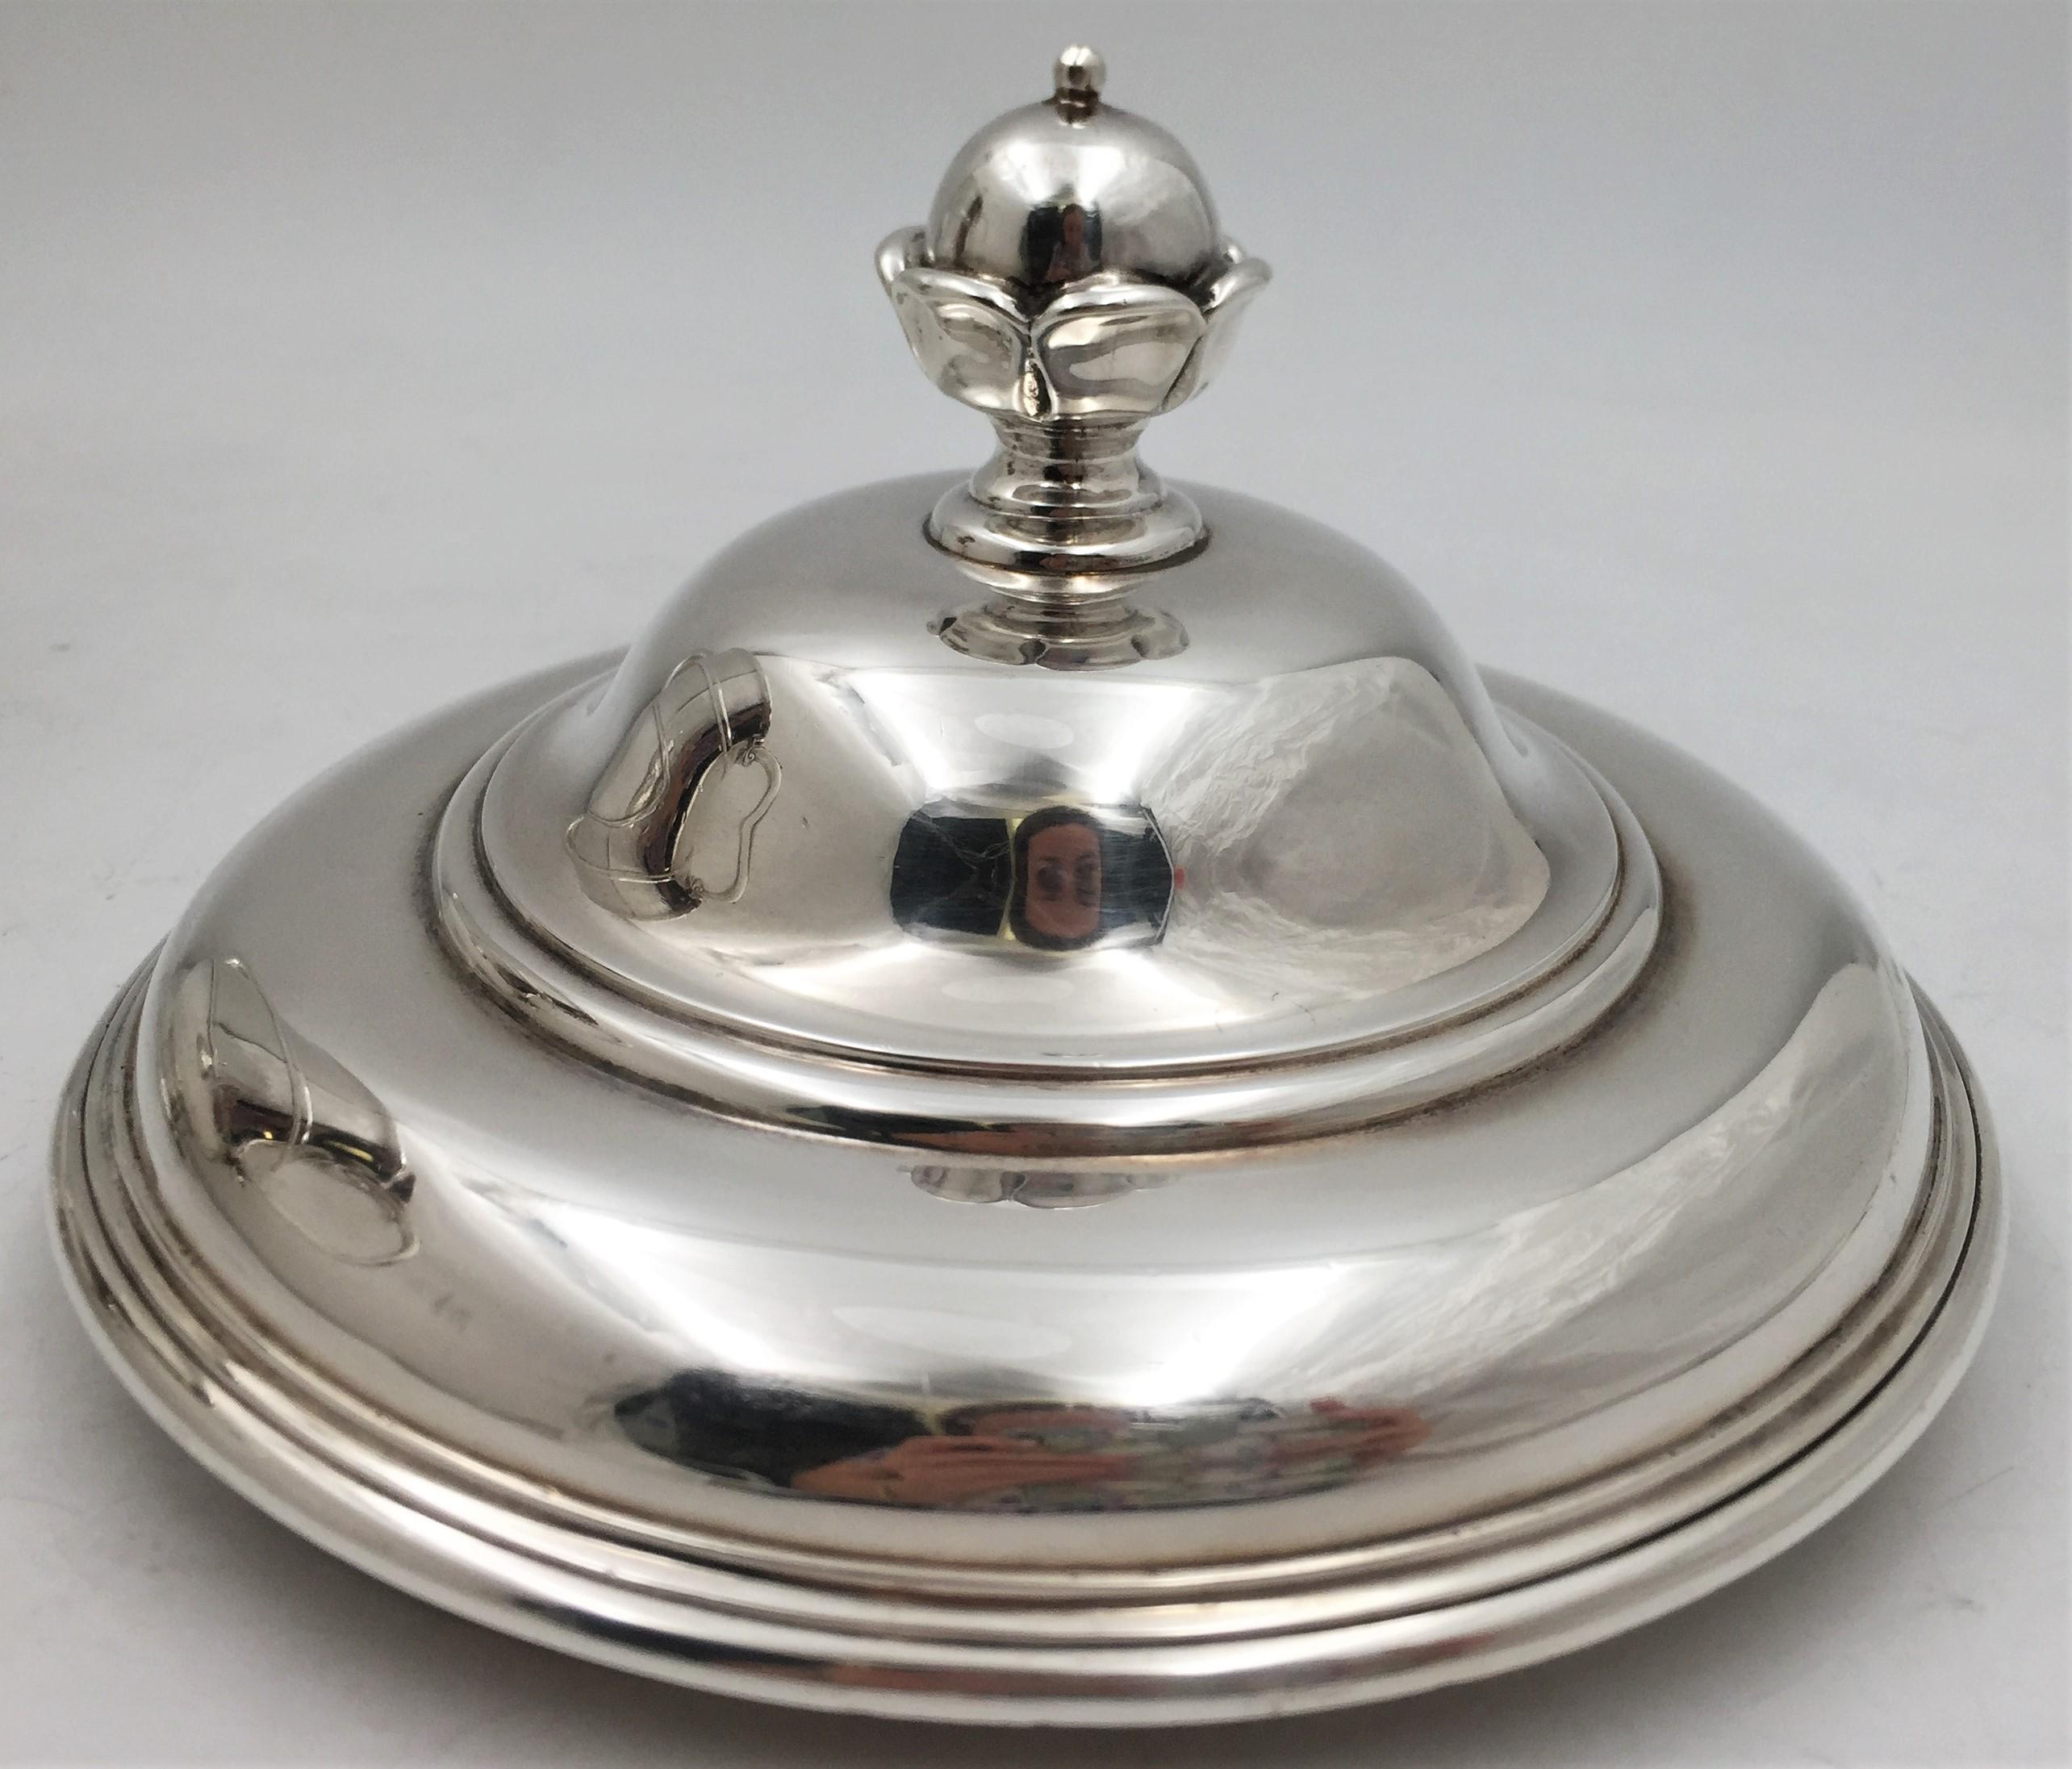 Crichton English Sterling Silver 1917 Two-Handled Trophy/ Urn in Georgian Style 2